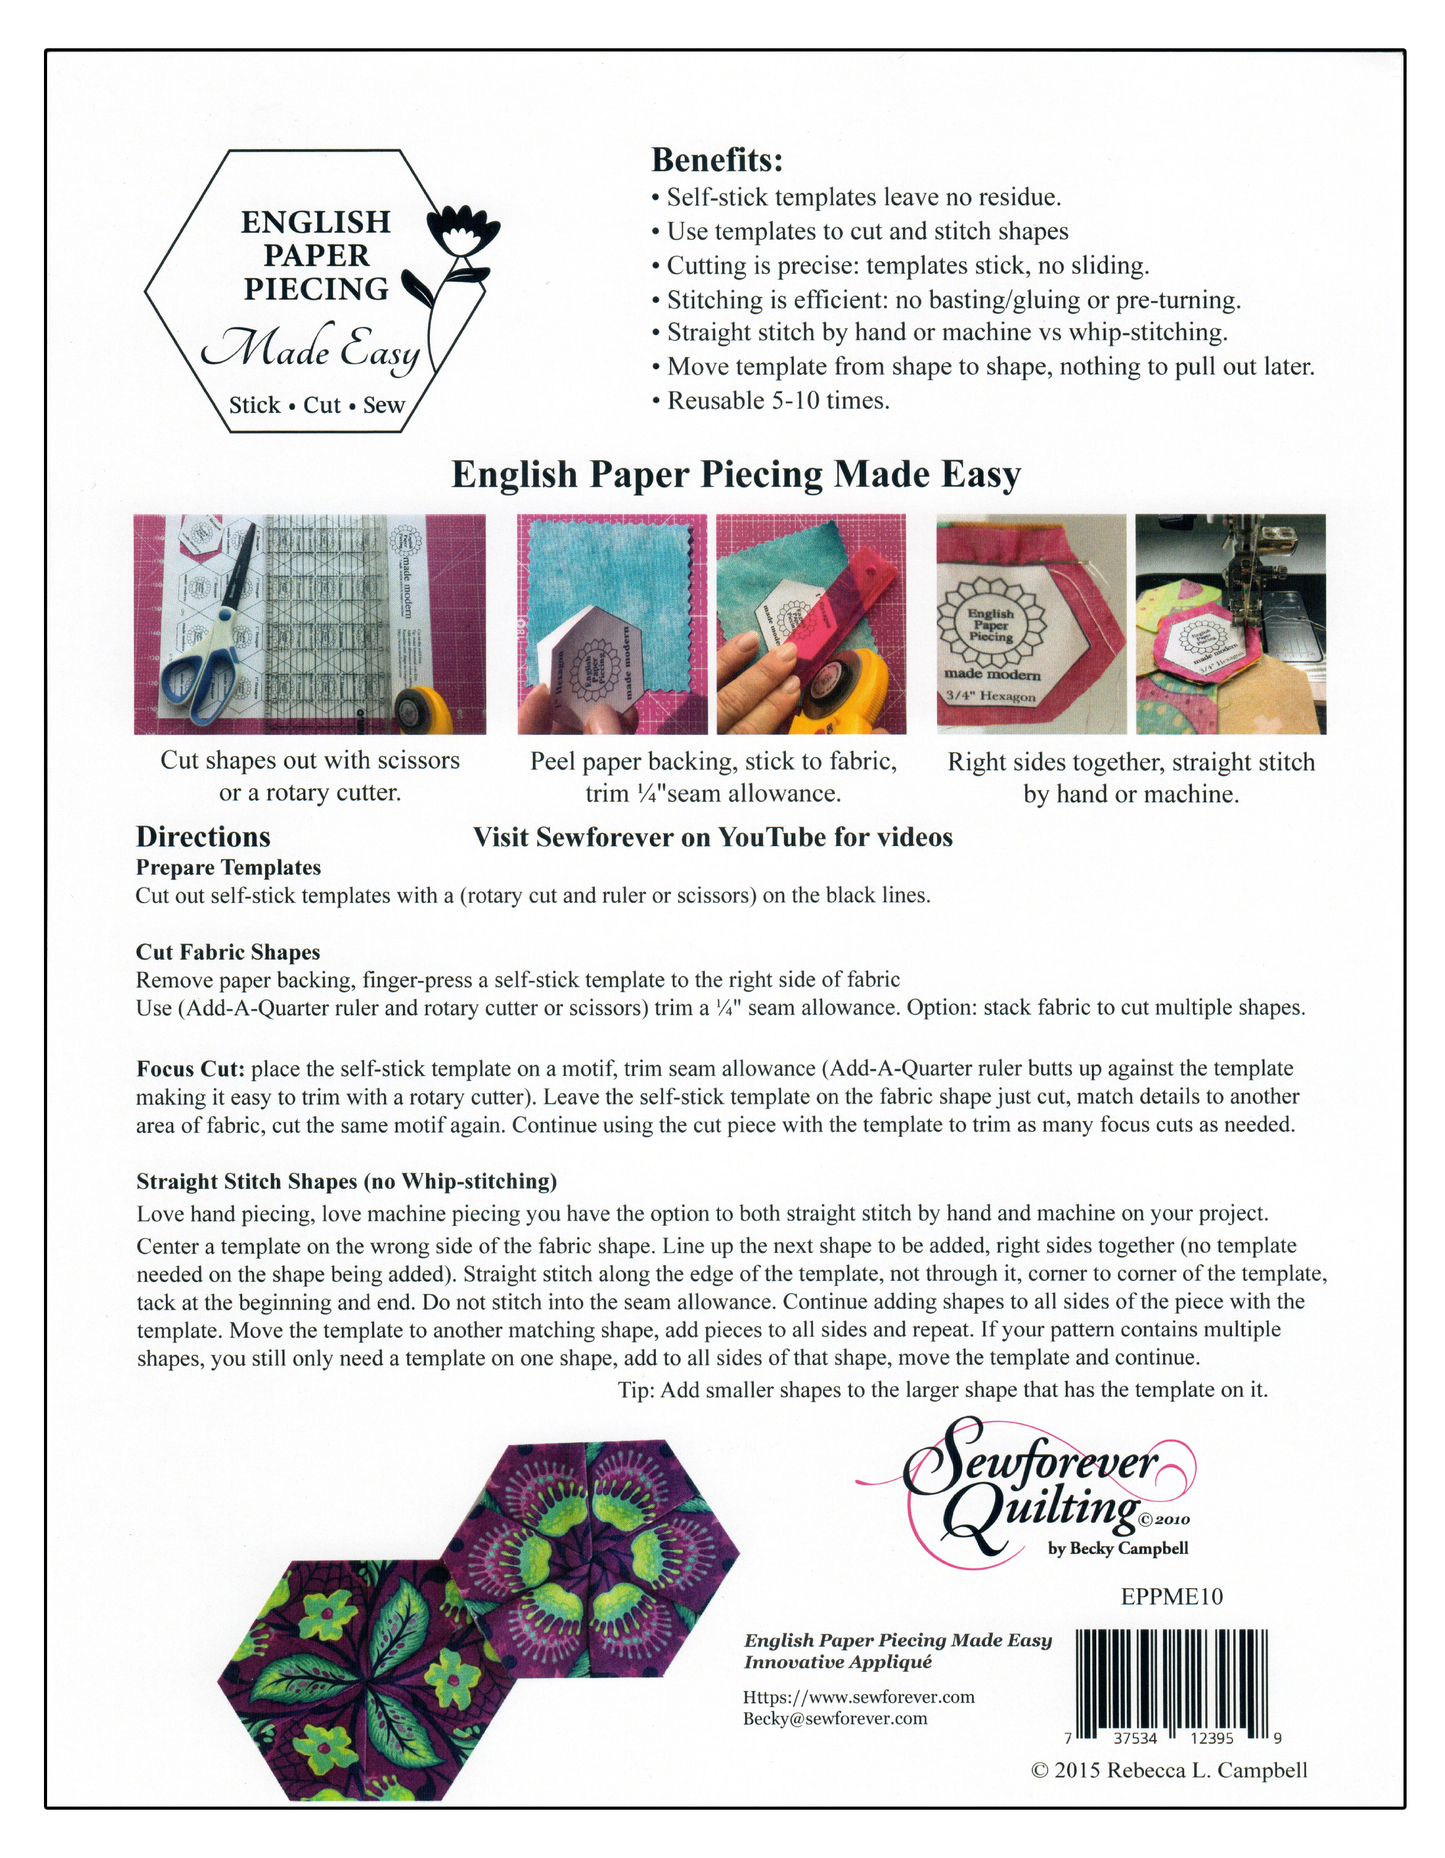 English Paper Piecing Made Easy,  Self-stick Templates.  No basting/gluing, whip-stitching, or pulling paper.  Just move the sticker from shape to shape and straight stitch by hand or machine.  Reusable 5-10 times.